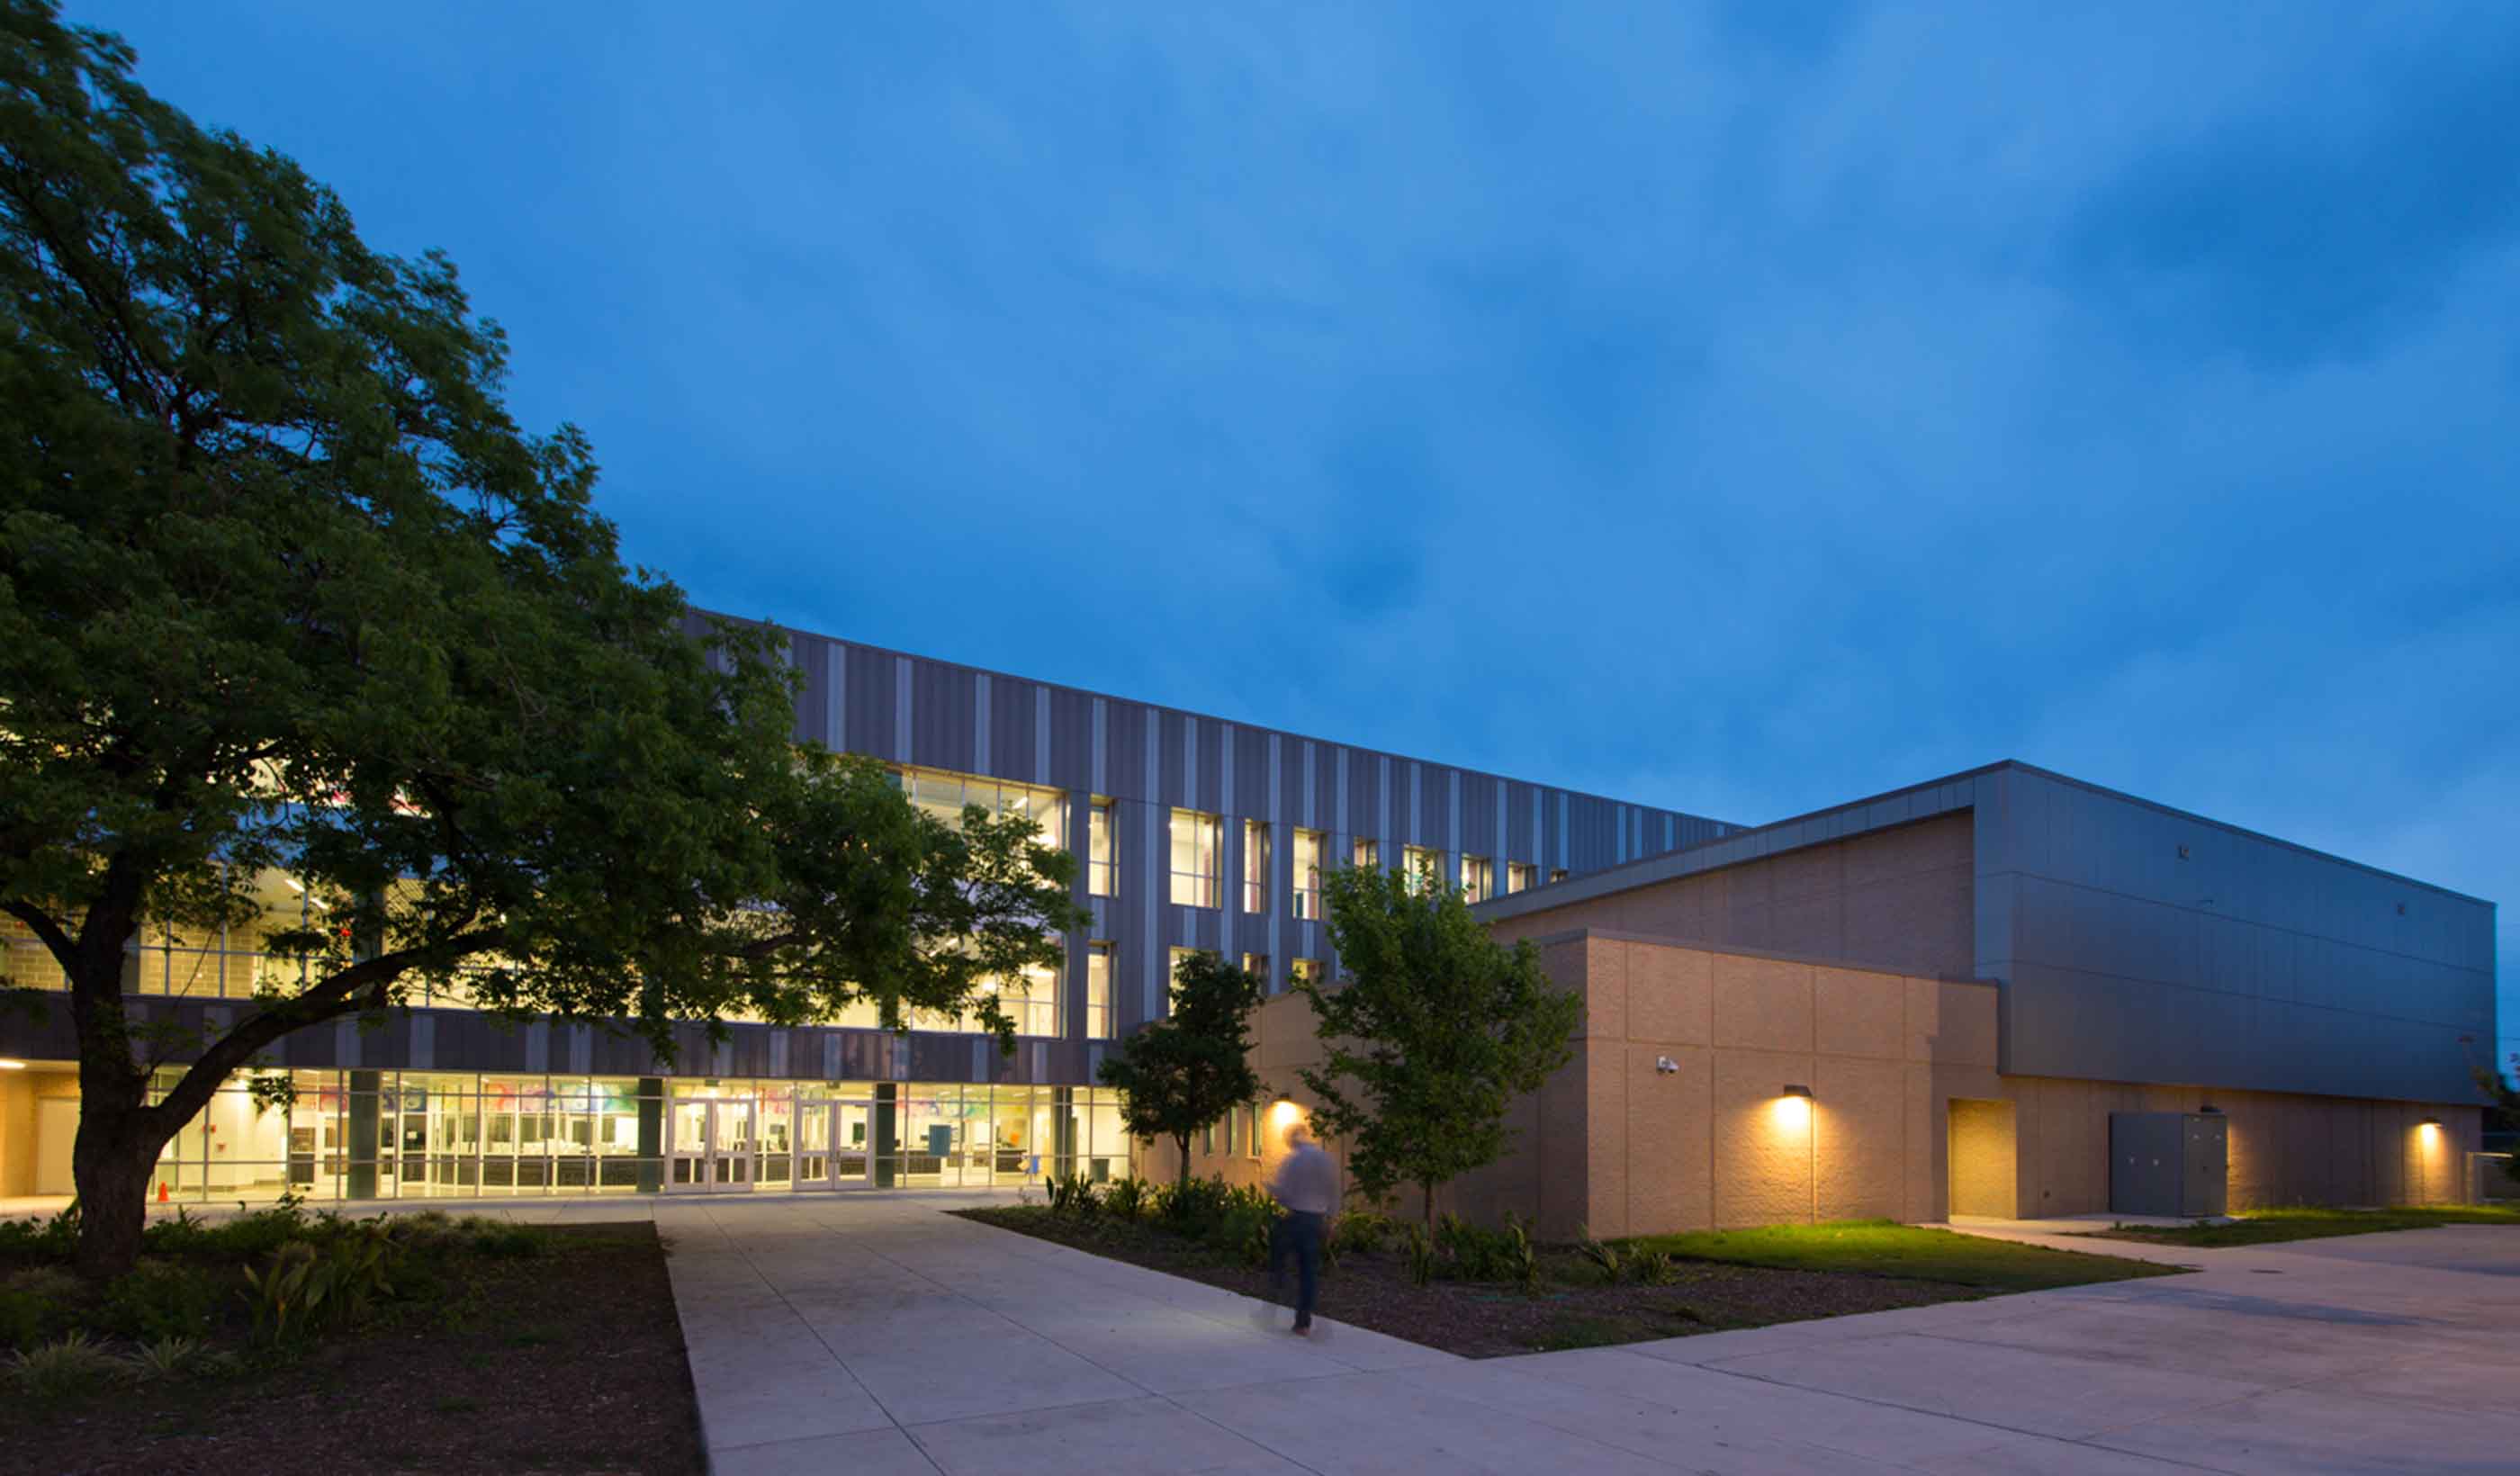 Stantec awarded design services for three education bond programs in the U.S.